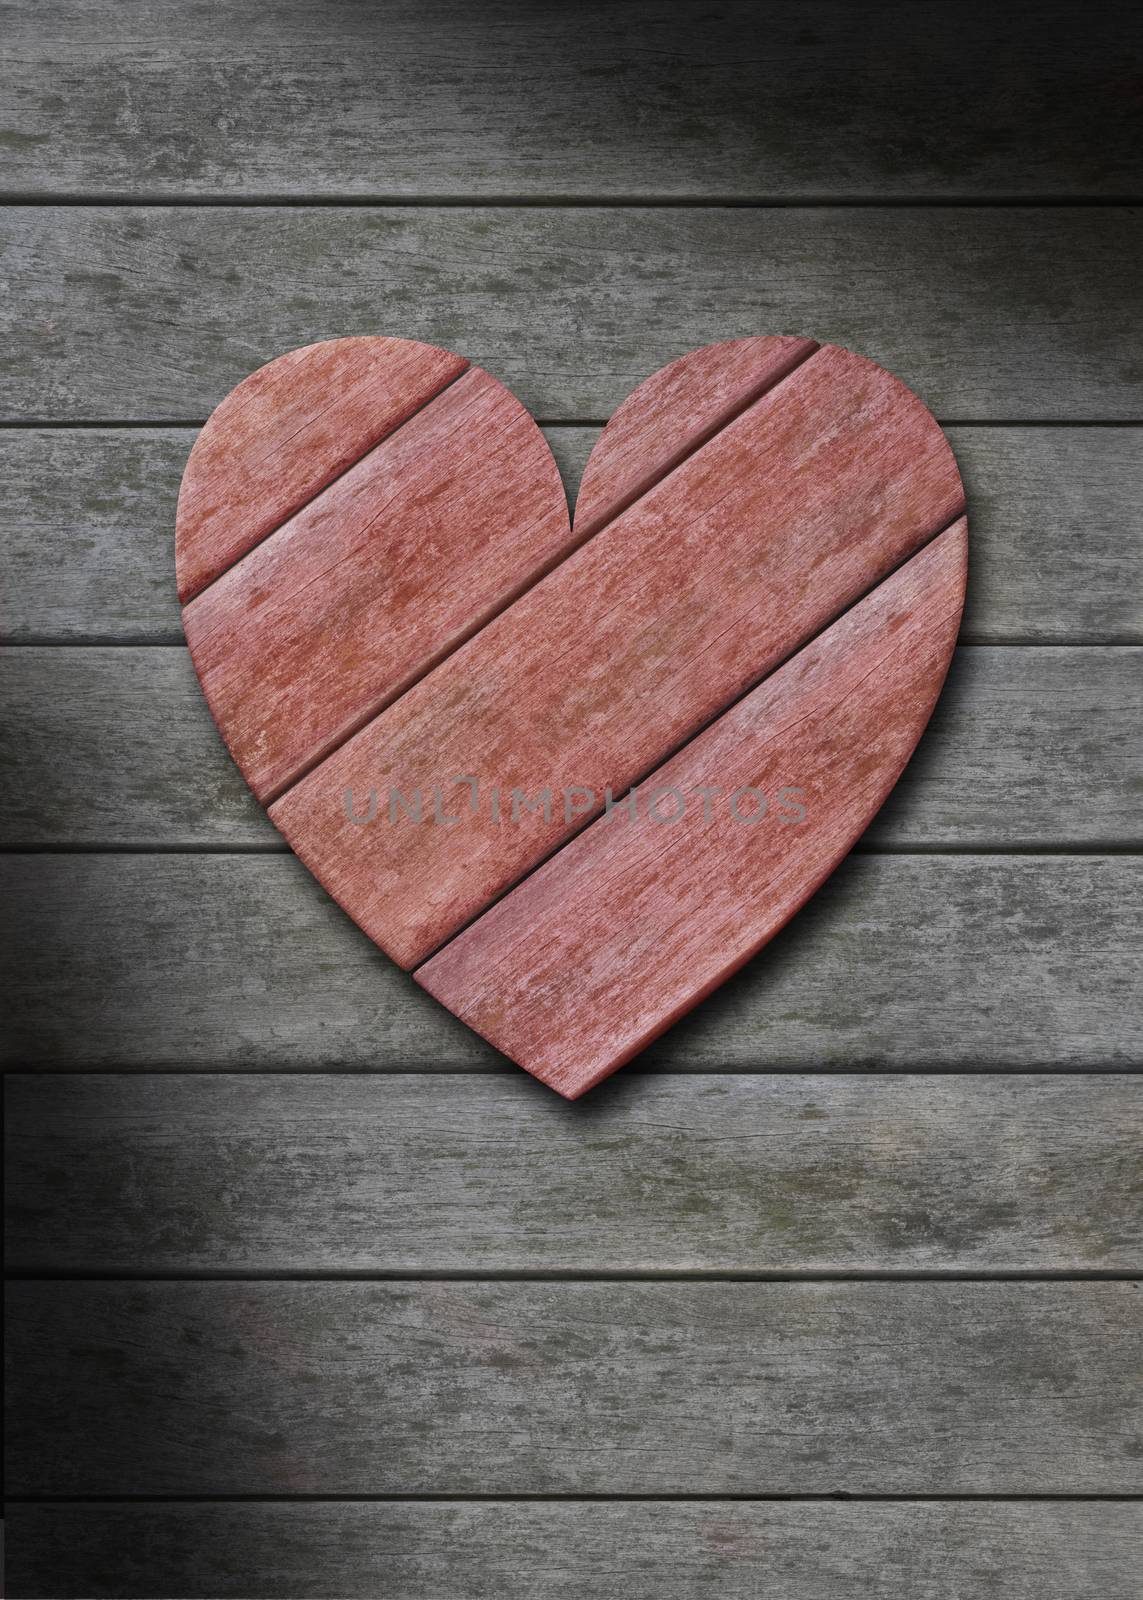 Red wood heart on gray weathered wooden background by Balefire9